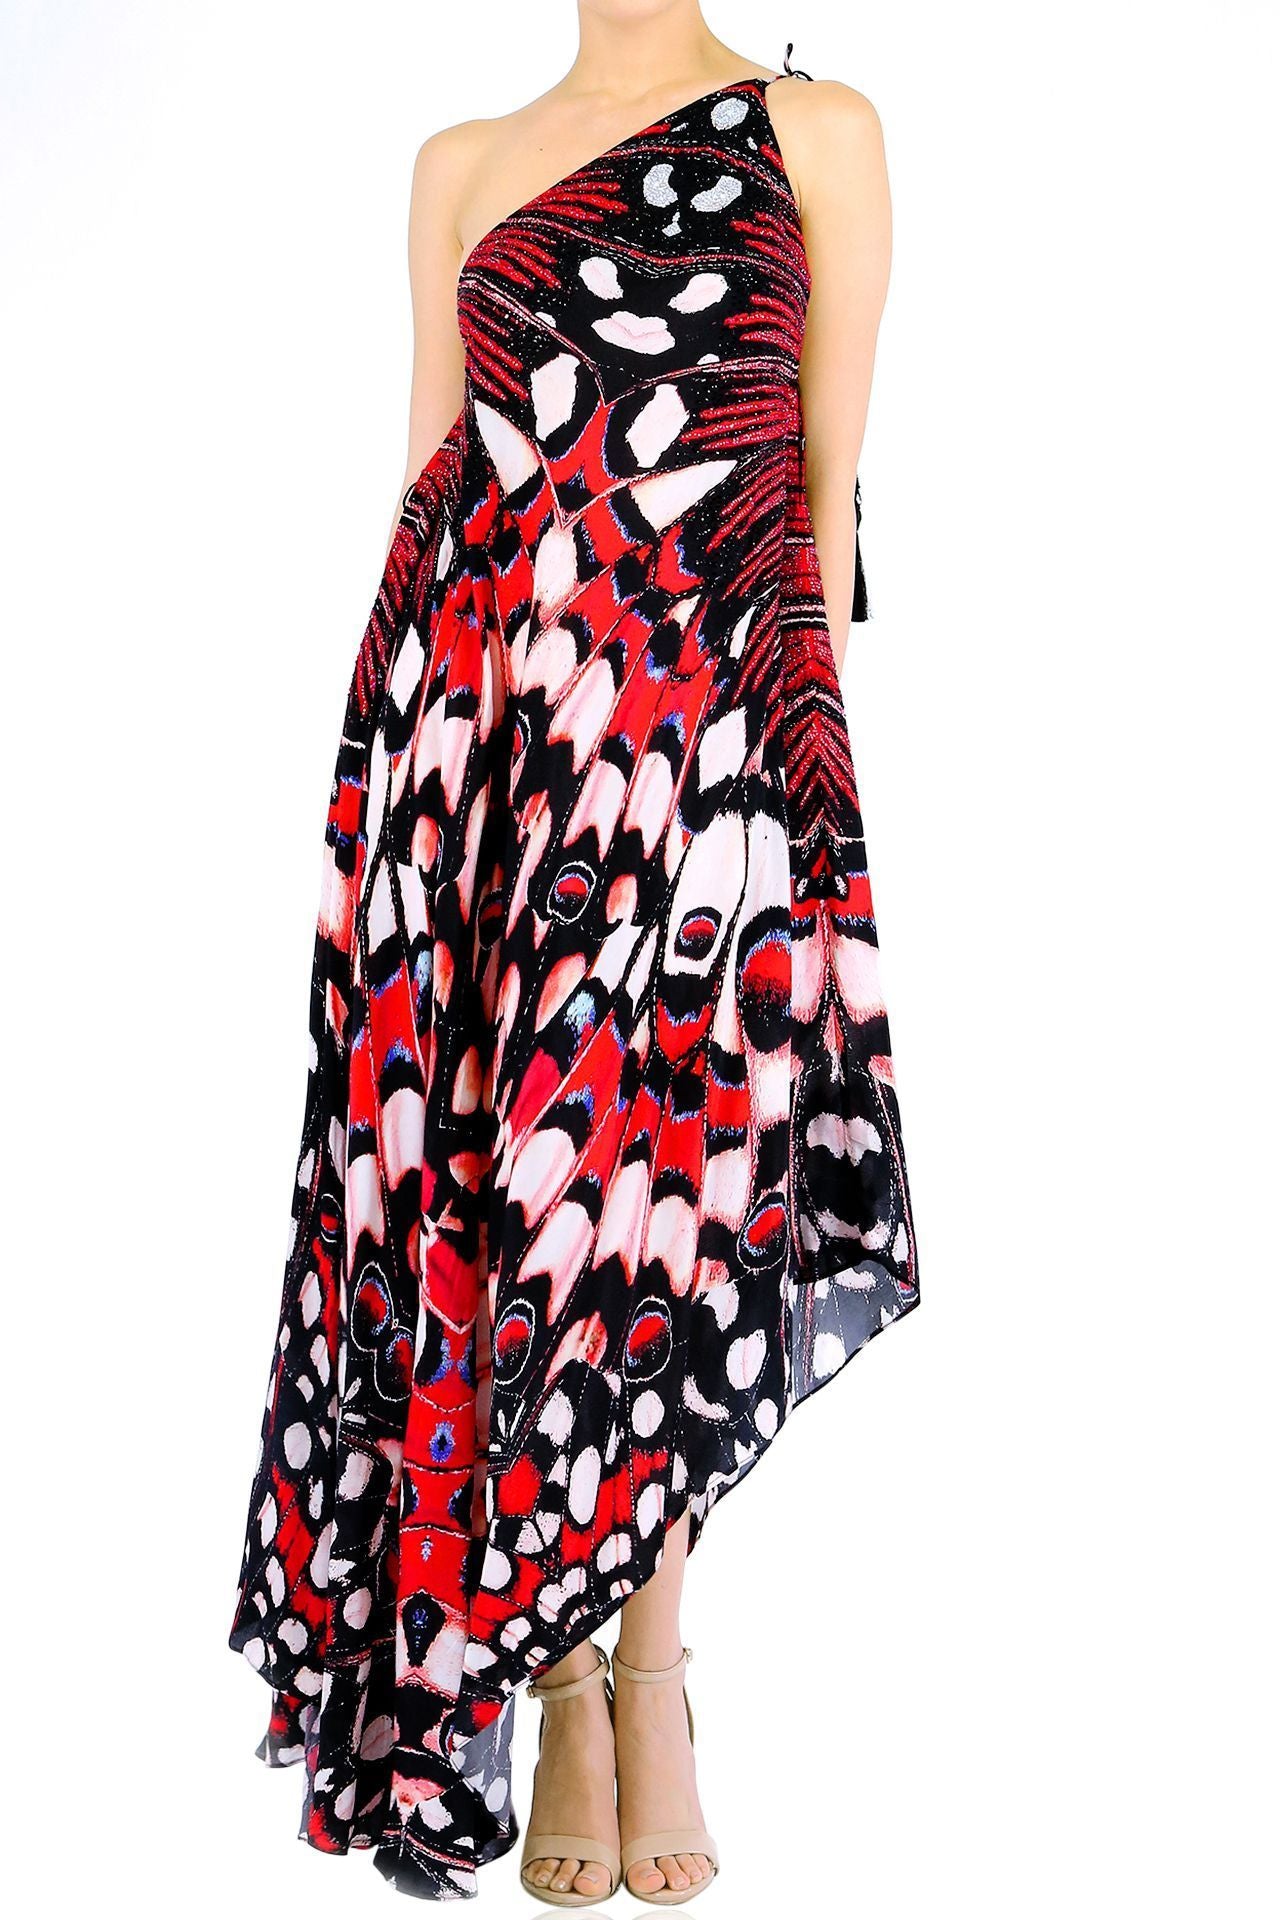 Butterfly Print Multiway Red Dress